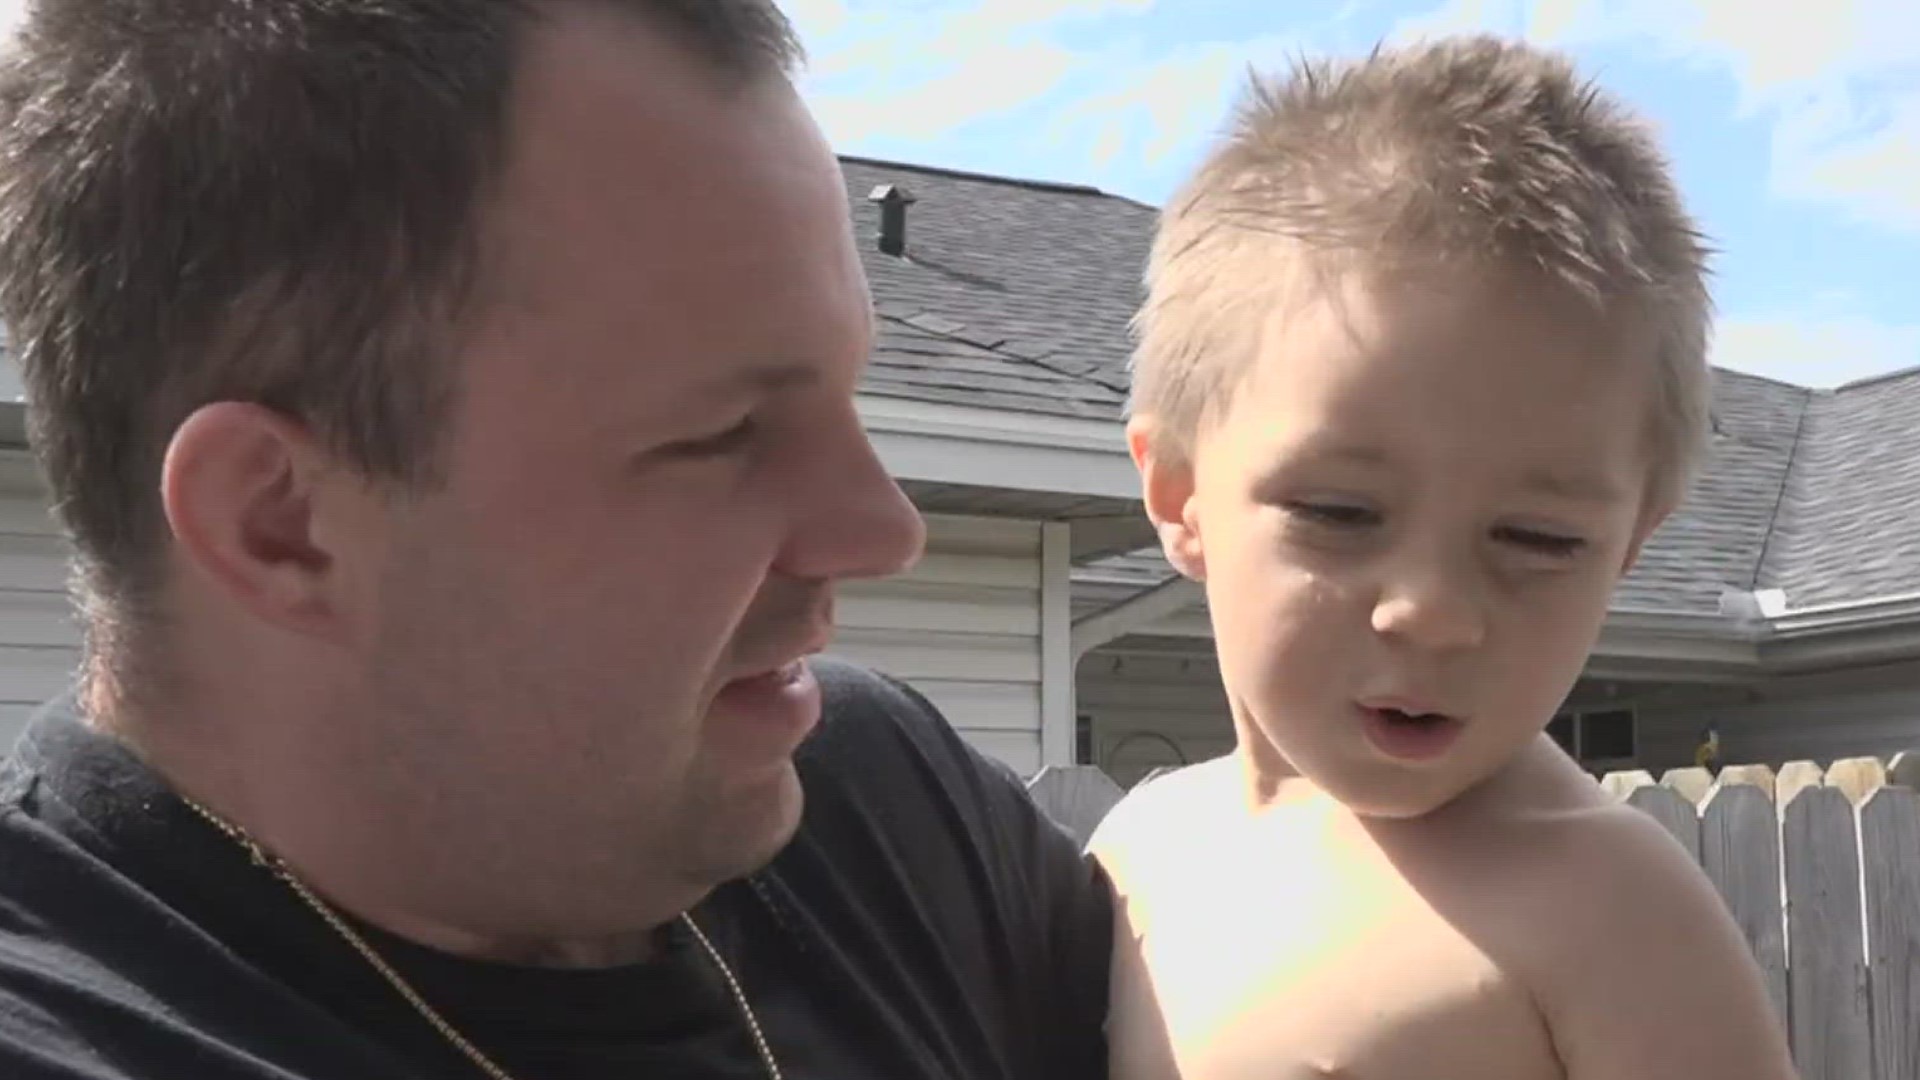 Dustin Cronan was diagnosed with autism at the age of four. Now a father, Cronan said that he wants to be an example to his son Matthew -- who also has autism.